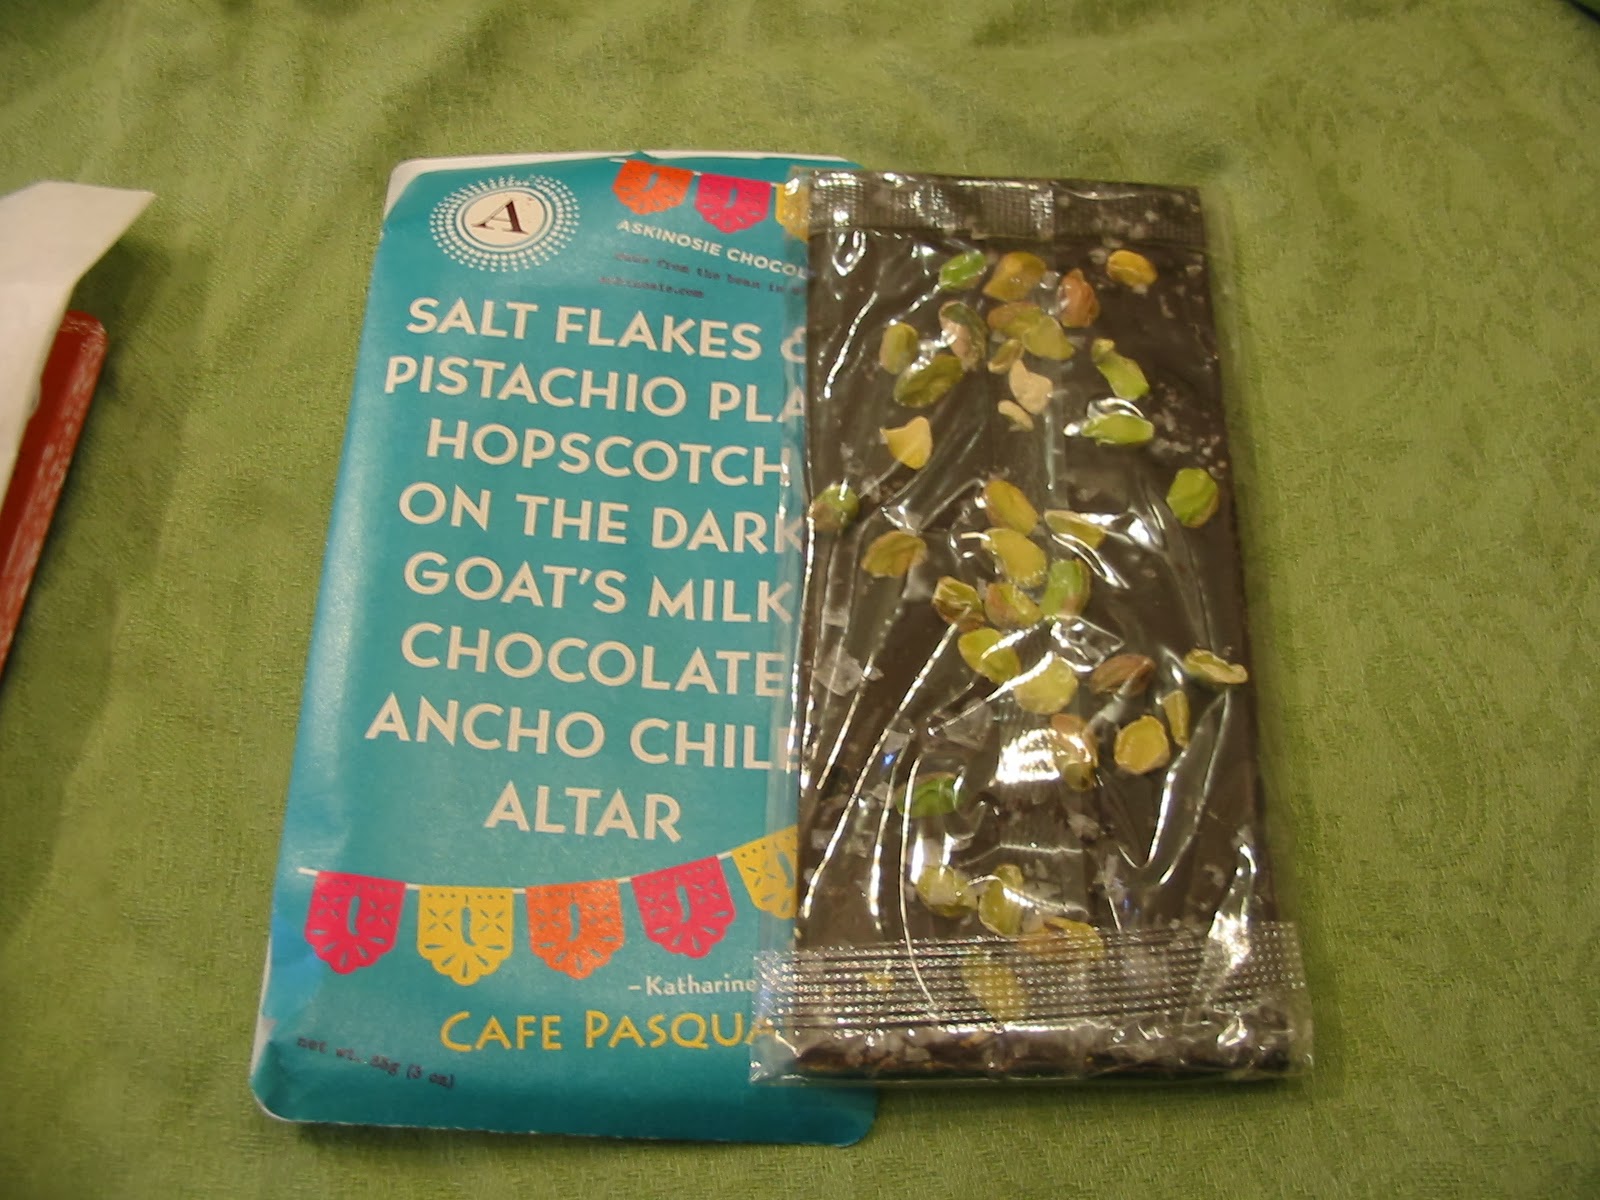 Cafe Pasqual's has sea salt flakes, Pistachio, and dark milk chocolate made with Goat's milk and some ancho chile! WOW, that quite a collection of flavors.